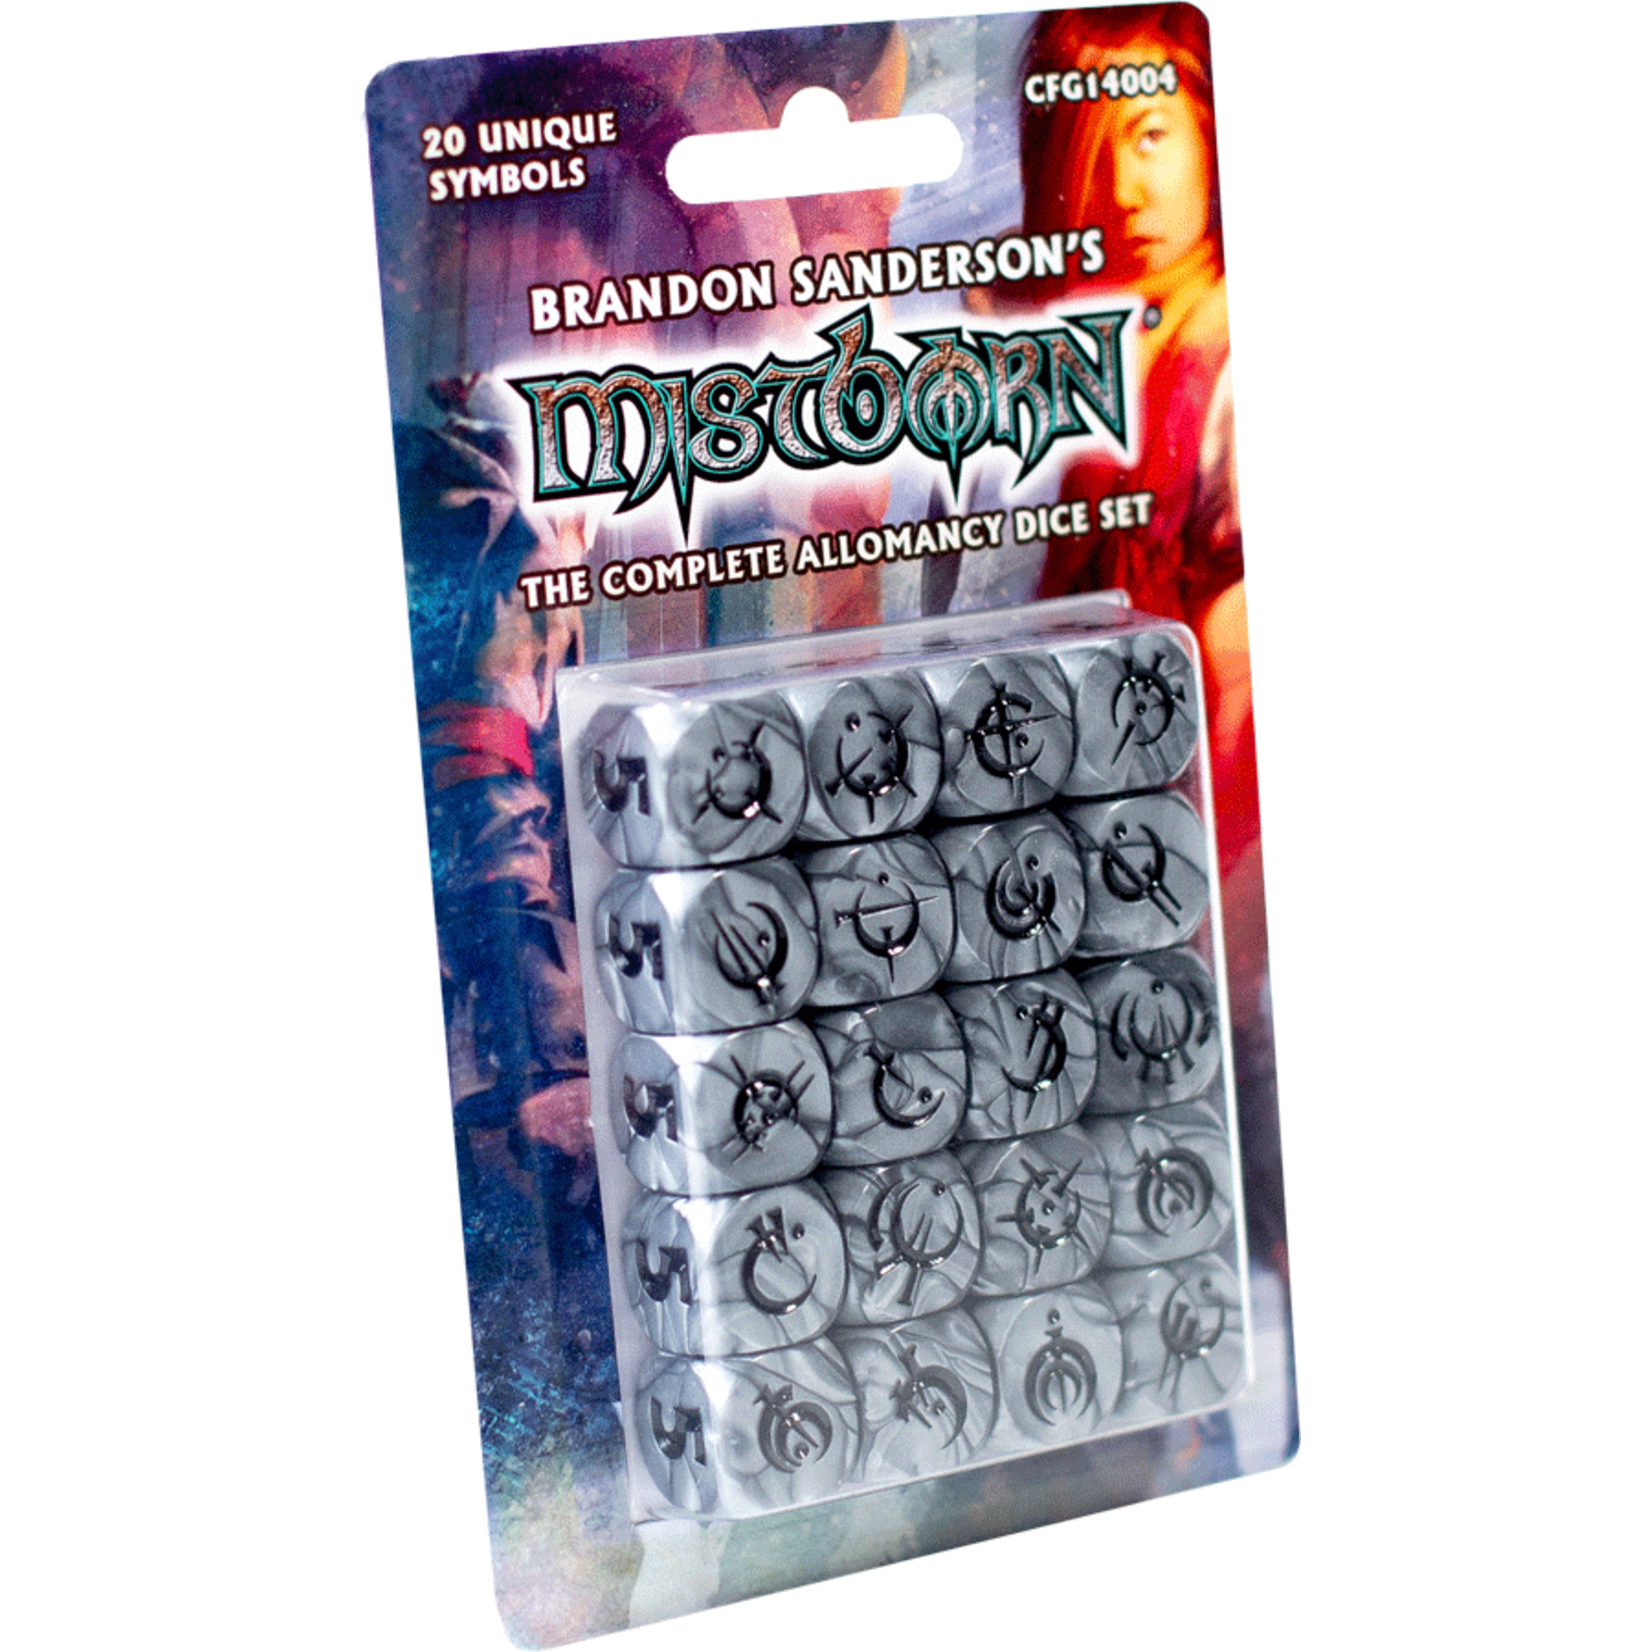 Crafty Games Mistborn: The Complete Allomancy Dice Set